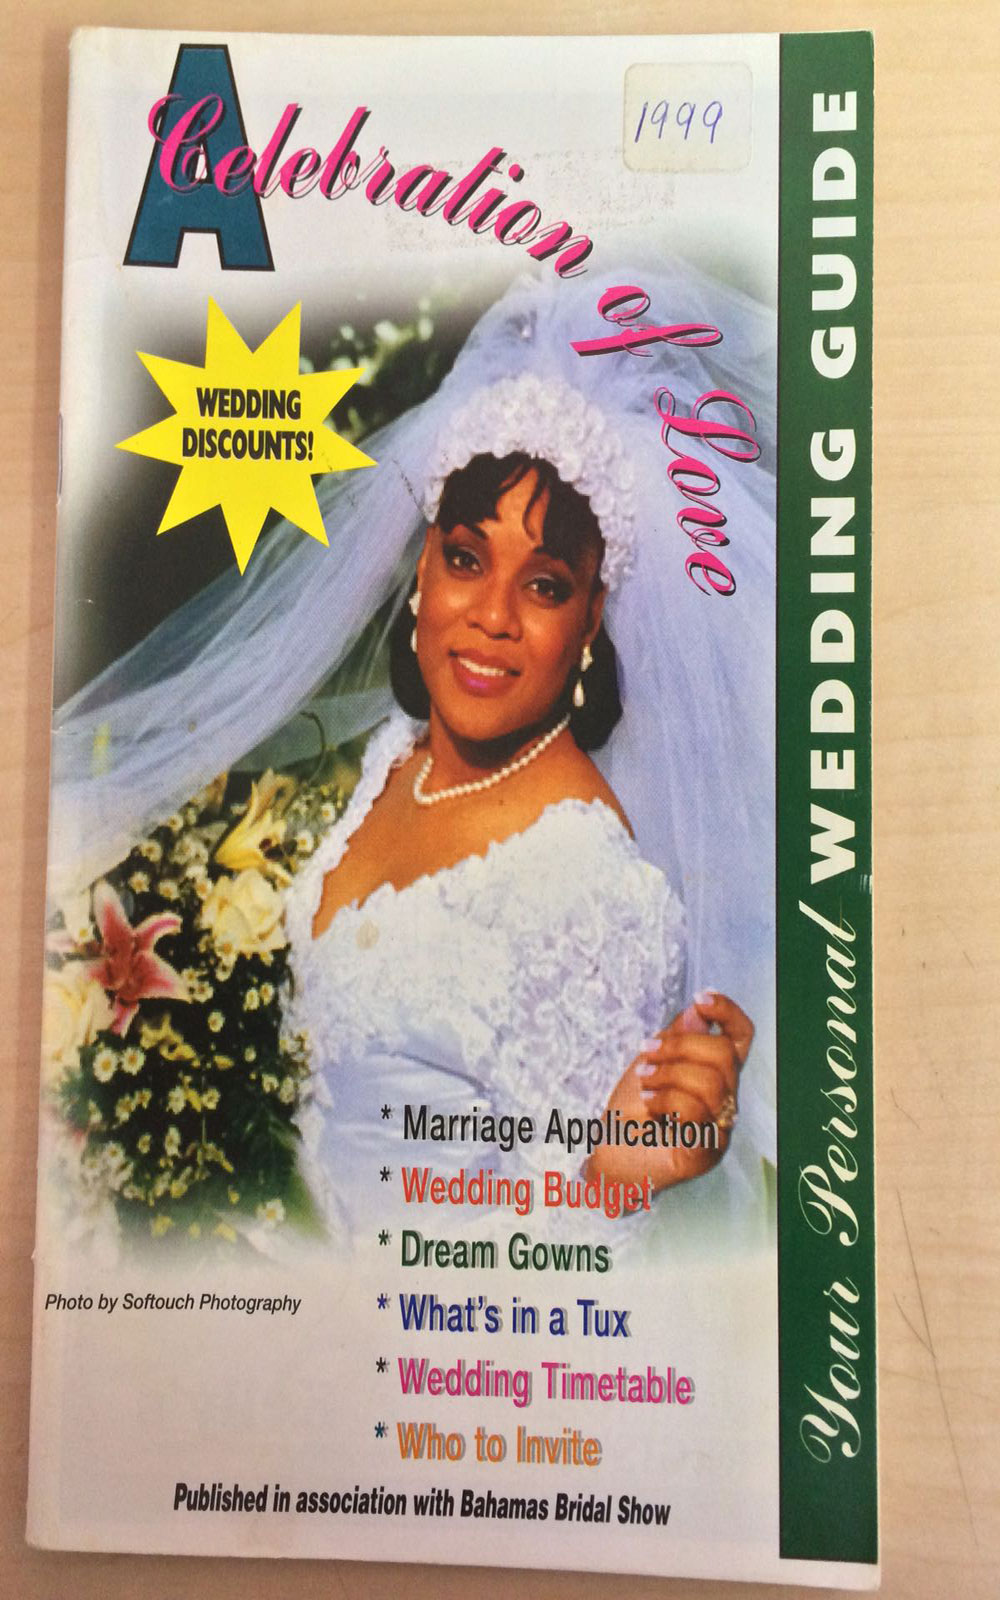 The Wedding Guide 1999-2000